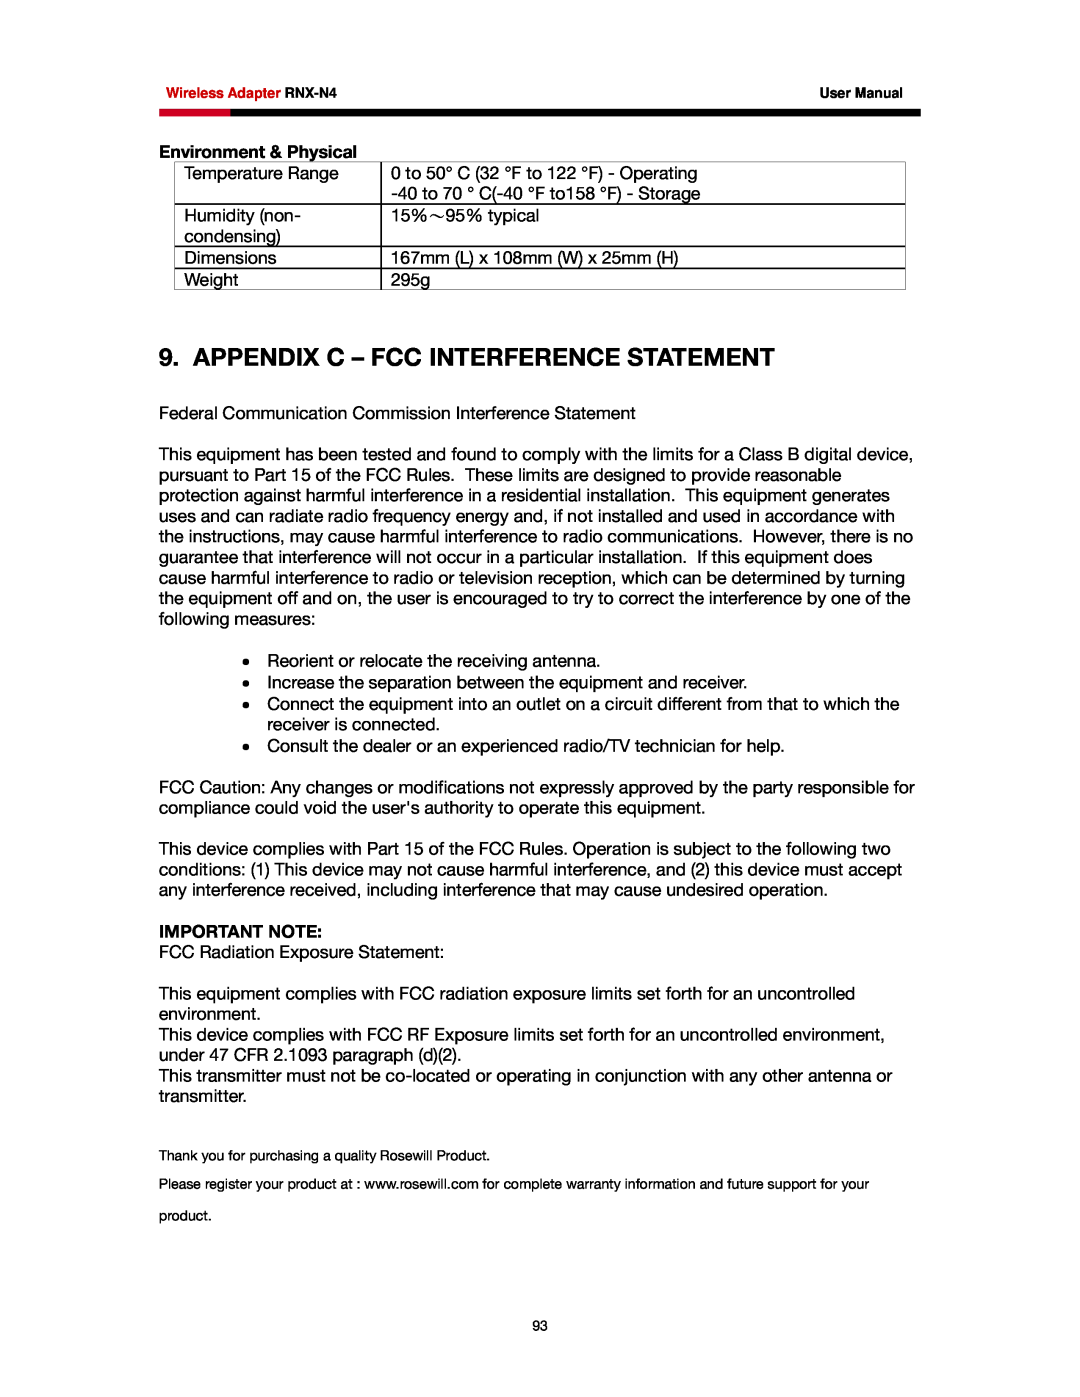 Rosewill RNX-N4 user manual Appendix C - Fcc Interference Statement, Environment & Physical, Important Note 